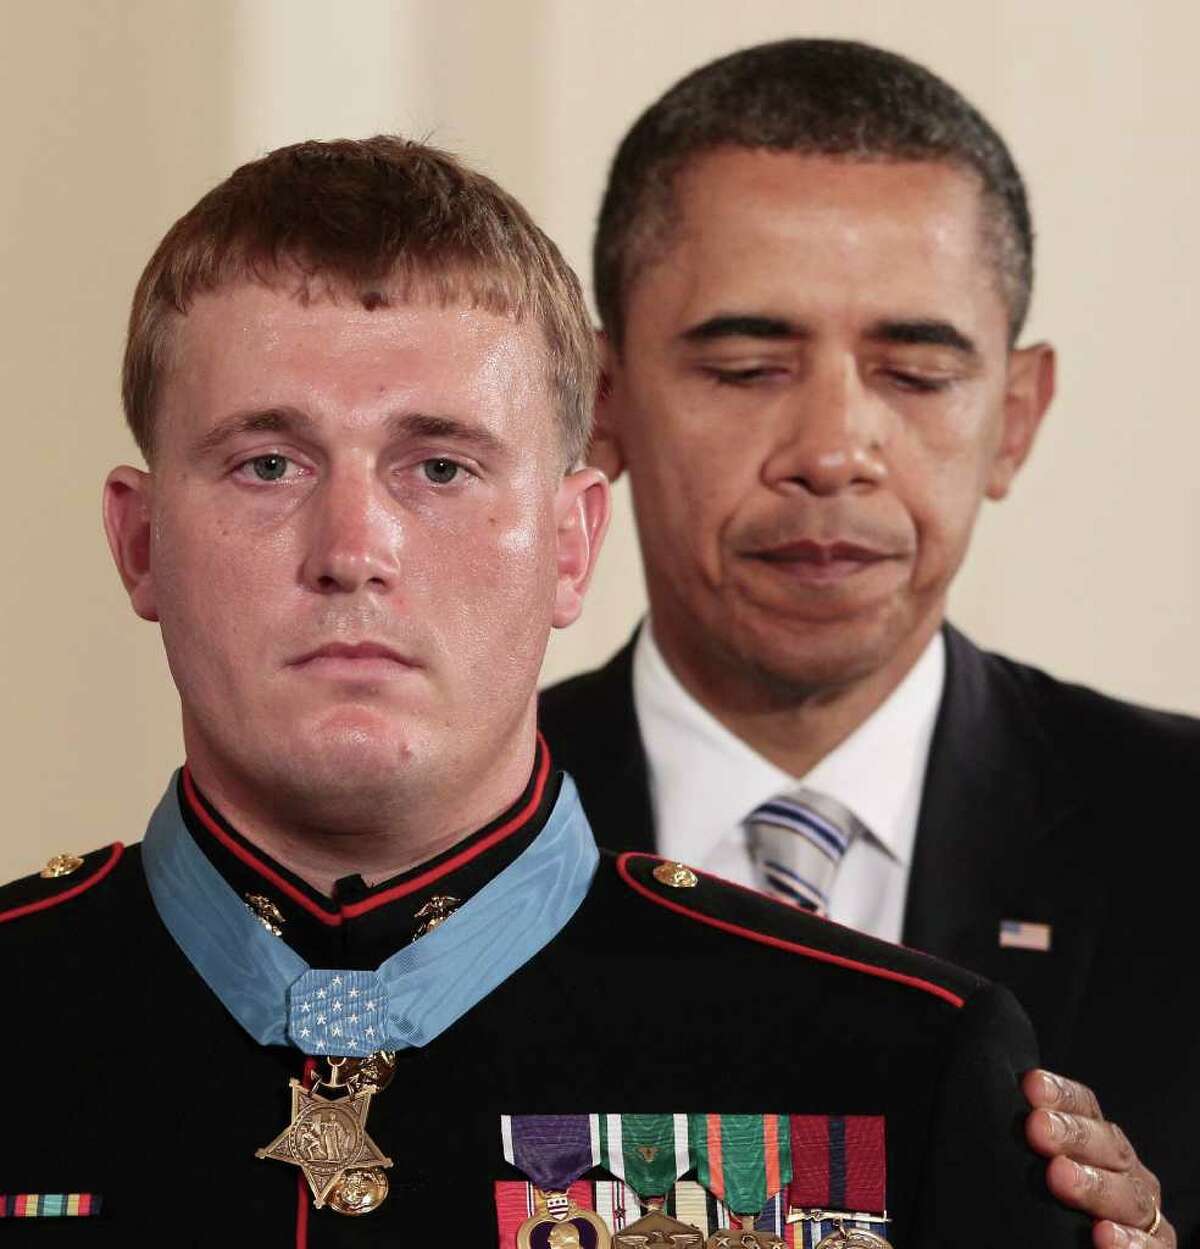 FILE - In this Sept. 15, 2011 file photo, President Barack Obama awards the Medal of Honor to former Marine Corps Cpl. Dakota Meyer, 23, from Greensburg, Ky., during a ceremony in the East Room of the White House in Washington. Meyer is suing defense contractor BAE Systems OASYS Inc., claiming that a manager at the company ridiculed his Medal of Honor, called him mentally unstable and suggested he had a drinking problem, thereby costing him a job.